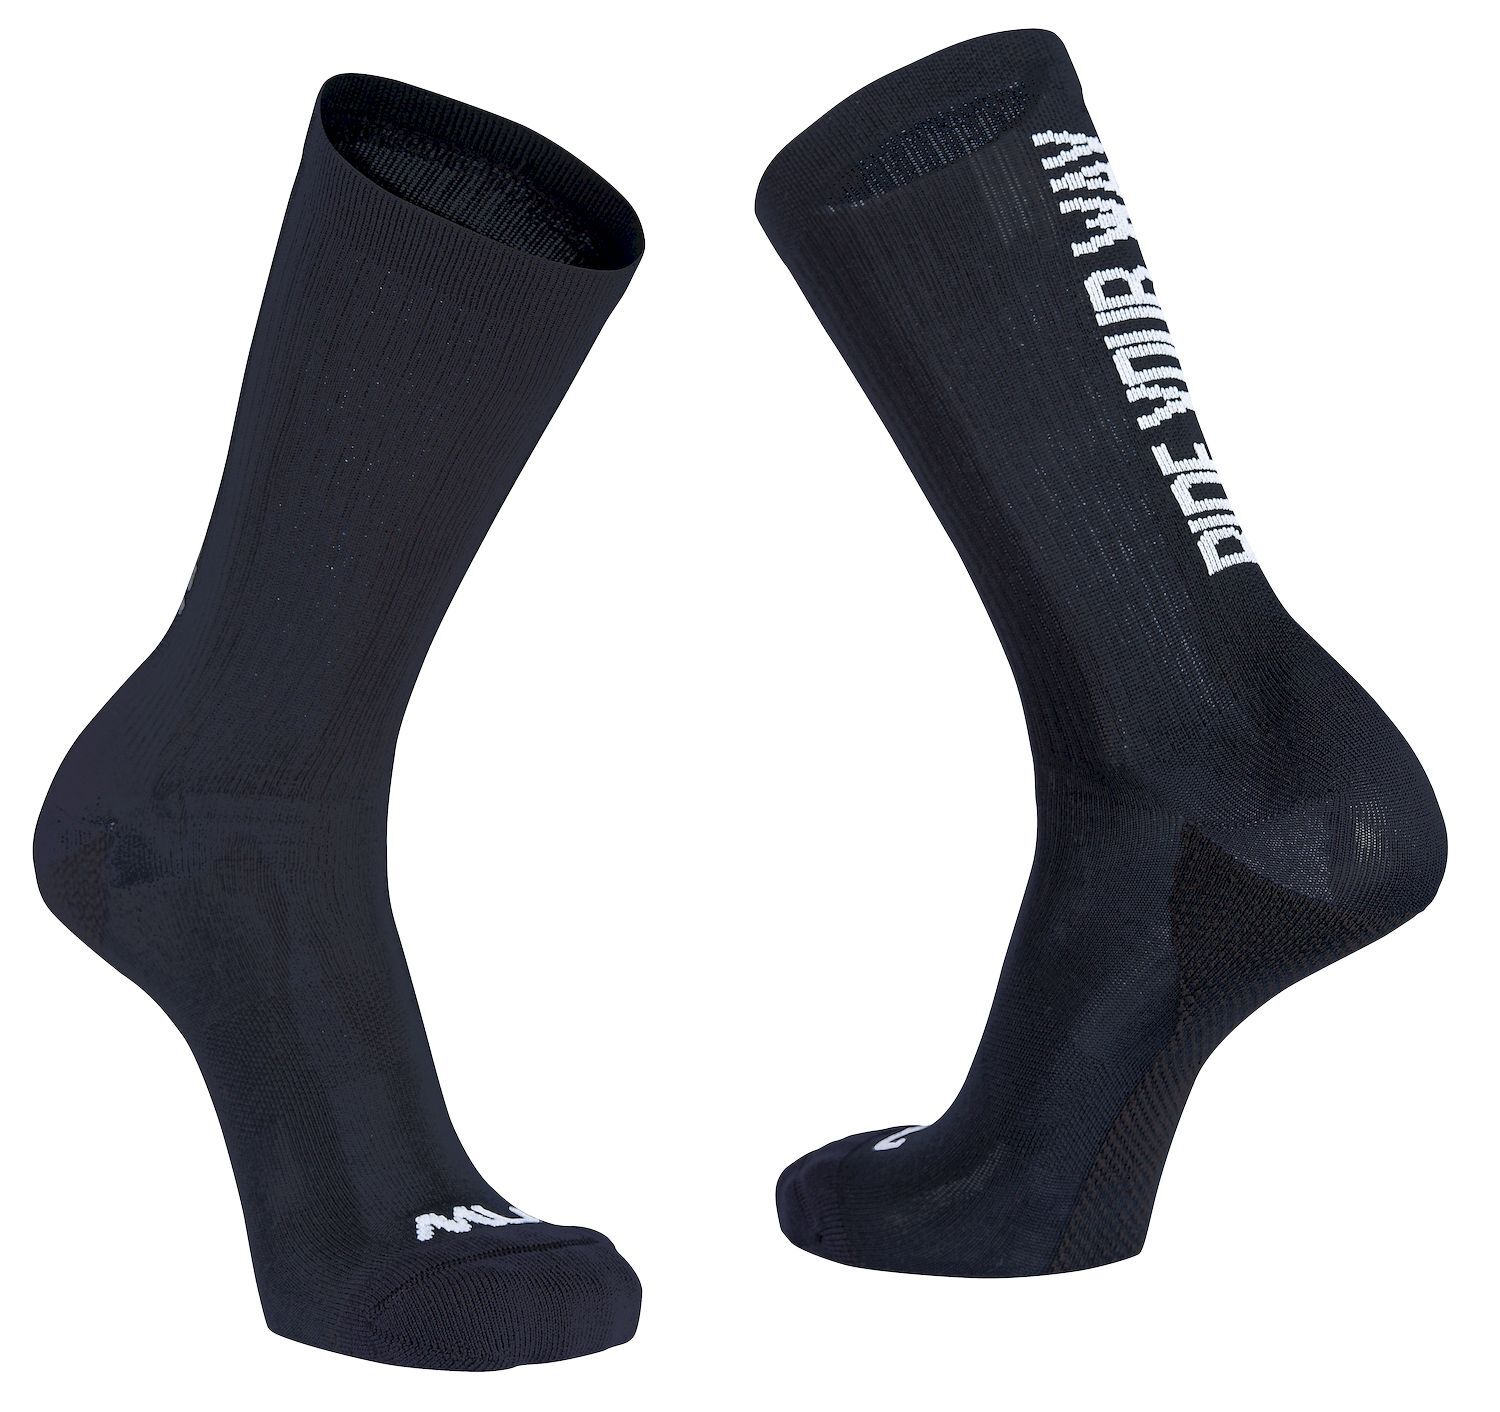 Northwave Ride Your Way Sock - Cycling socks